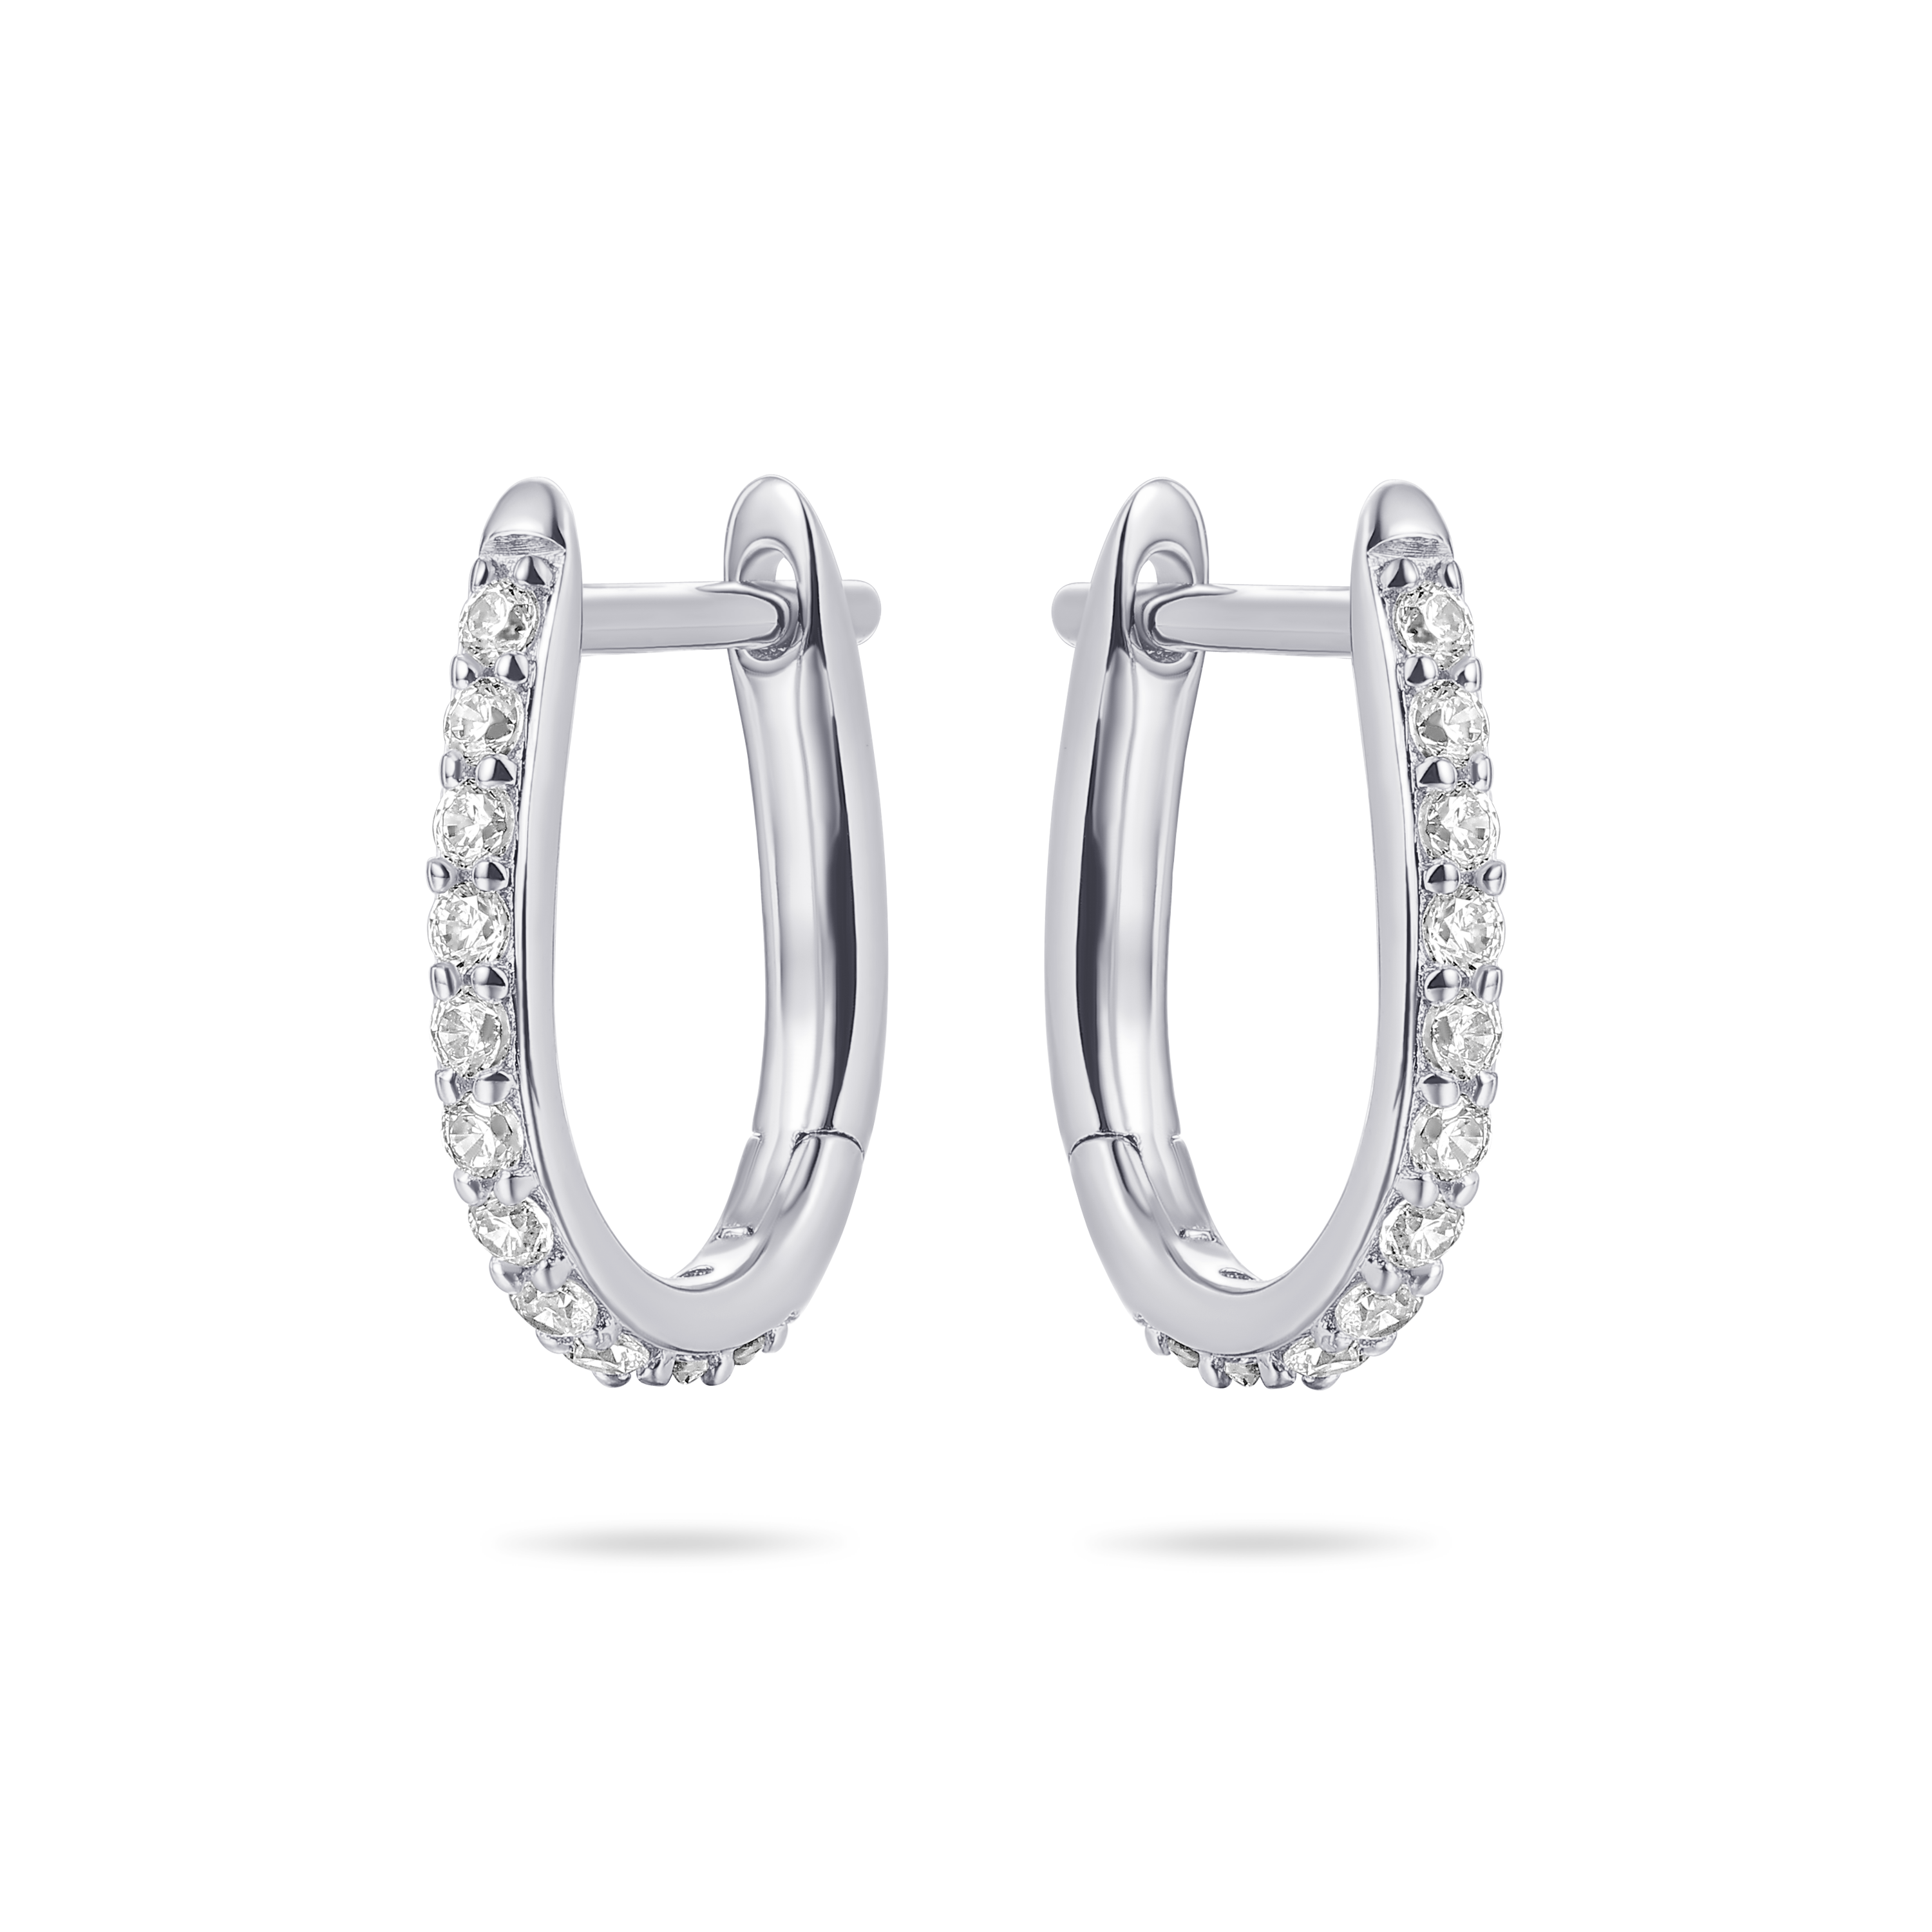 Gisser Jewels Silver Rhodium Plated Pave Oval Hoop Earrings